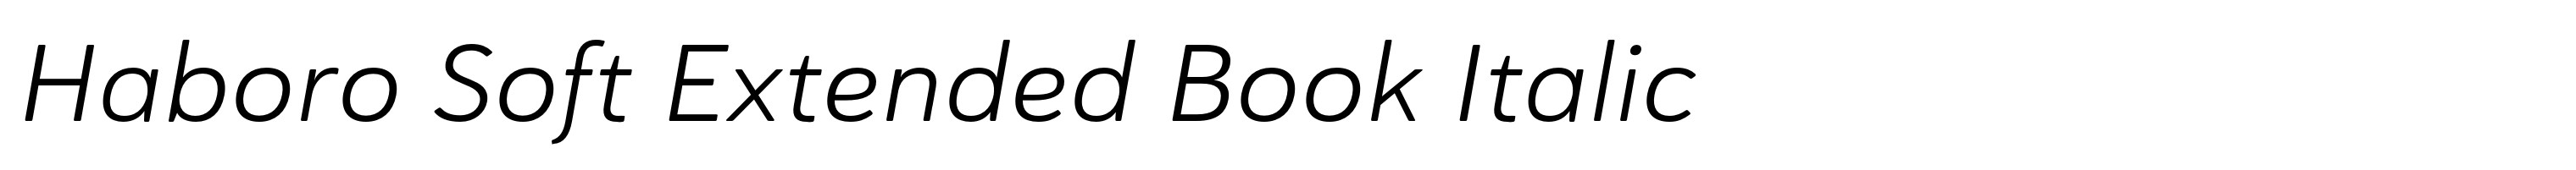 Haboro Soft Extended Book Italic